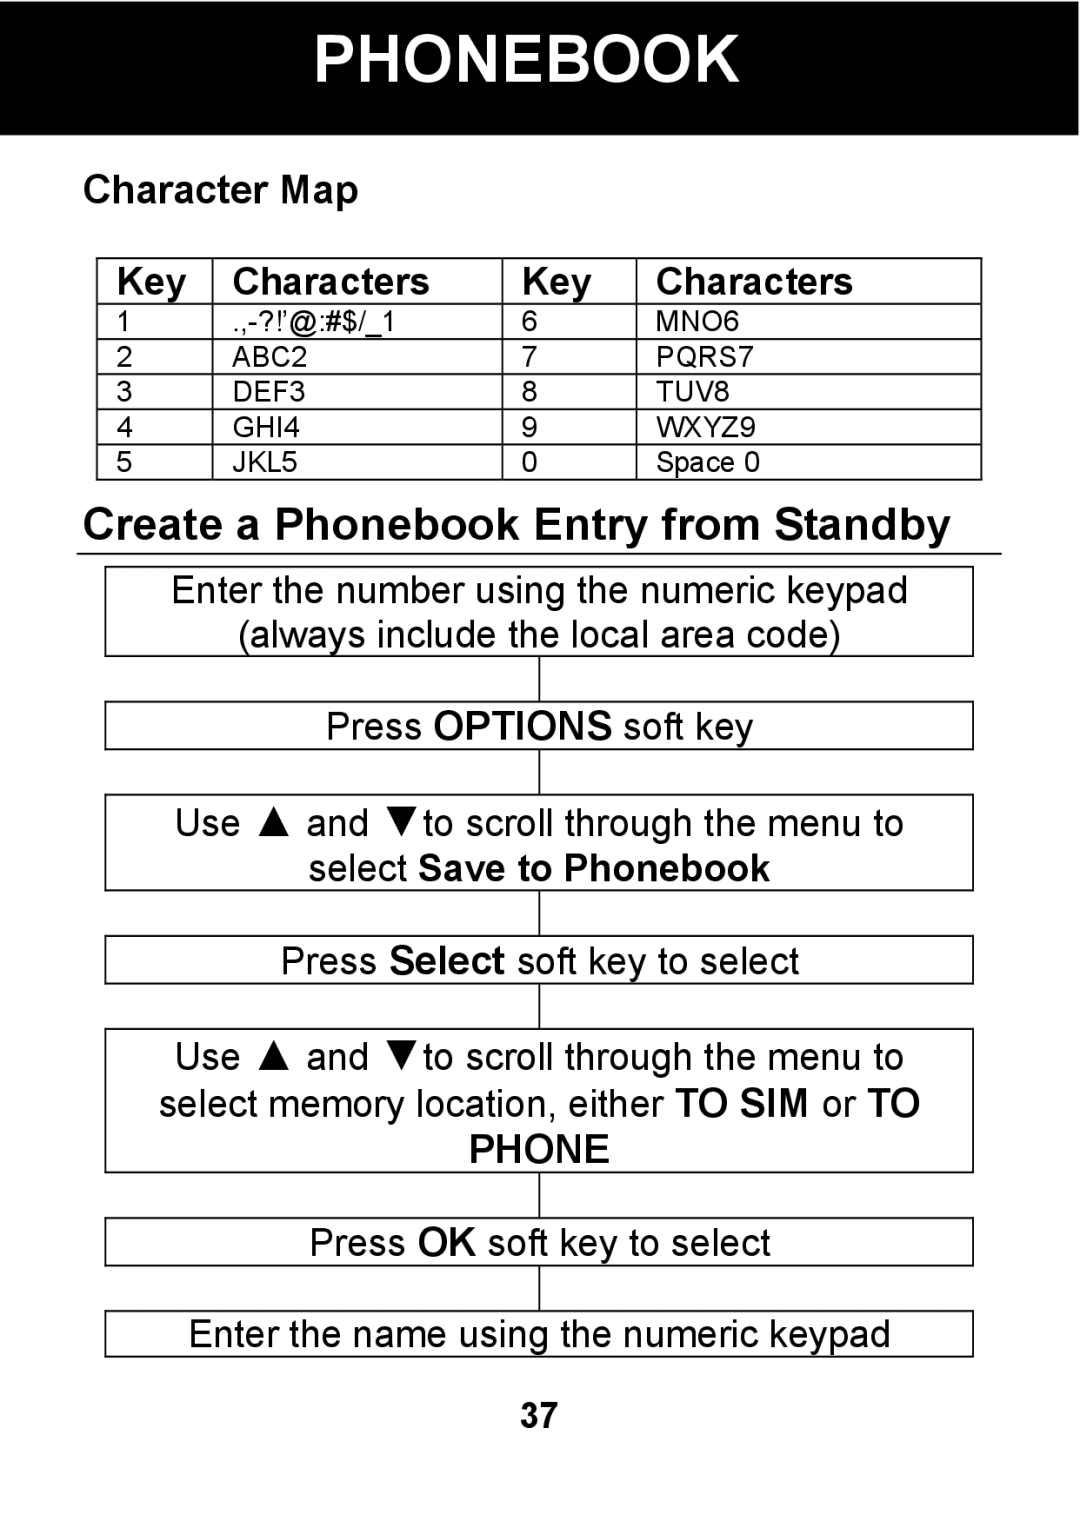 Pal/Pax PAL101 manual Create a Phonebook Entry from Standby, Character Map, Key Characters, Select Save to Phonebook 